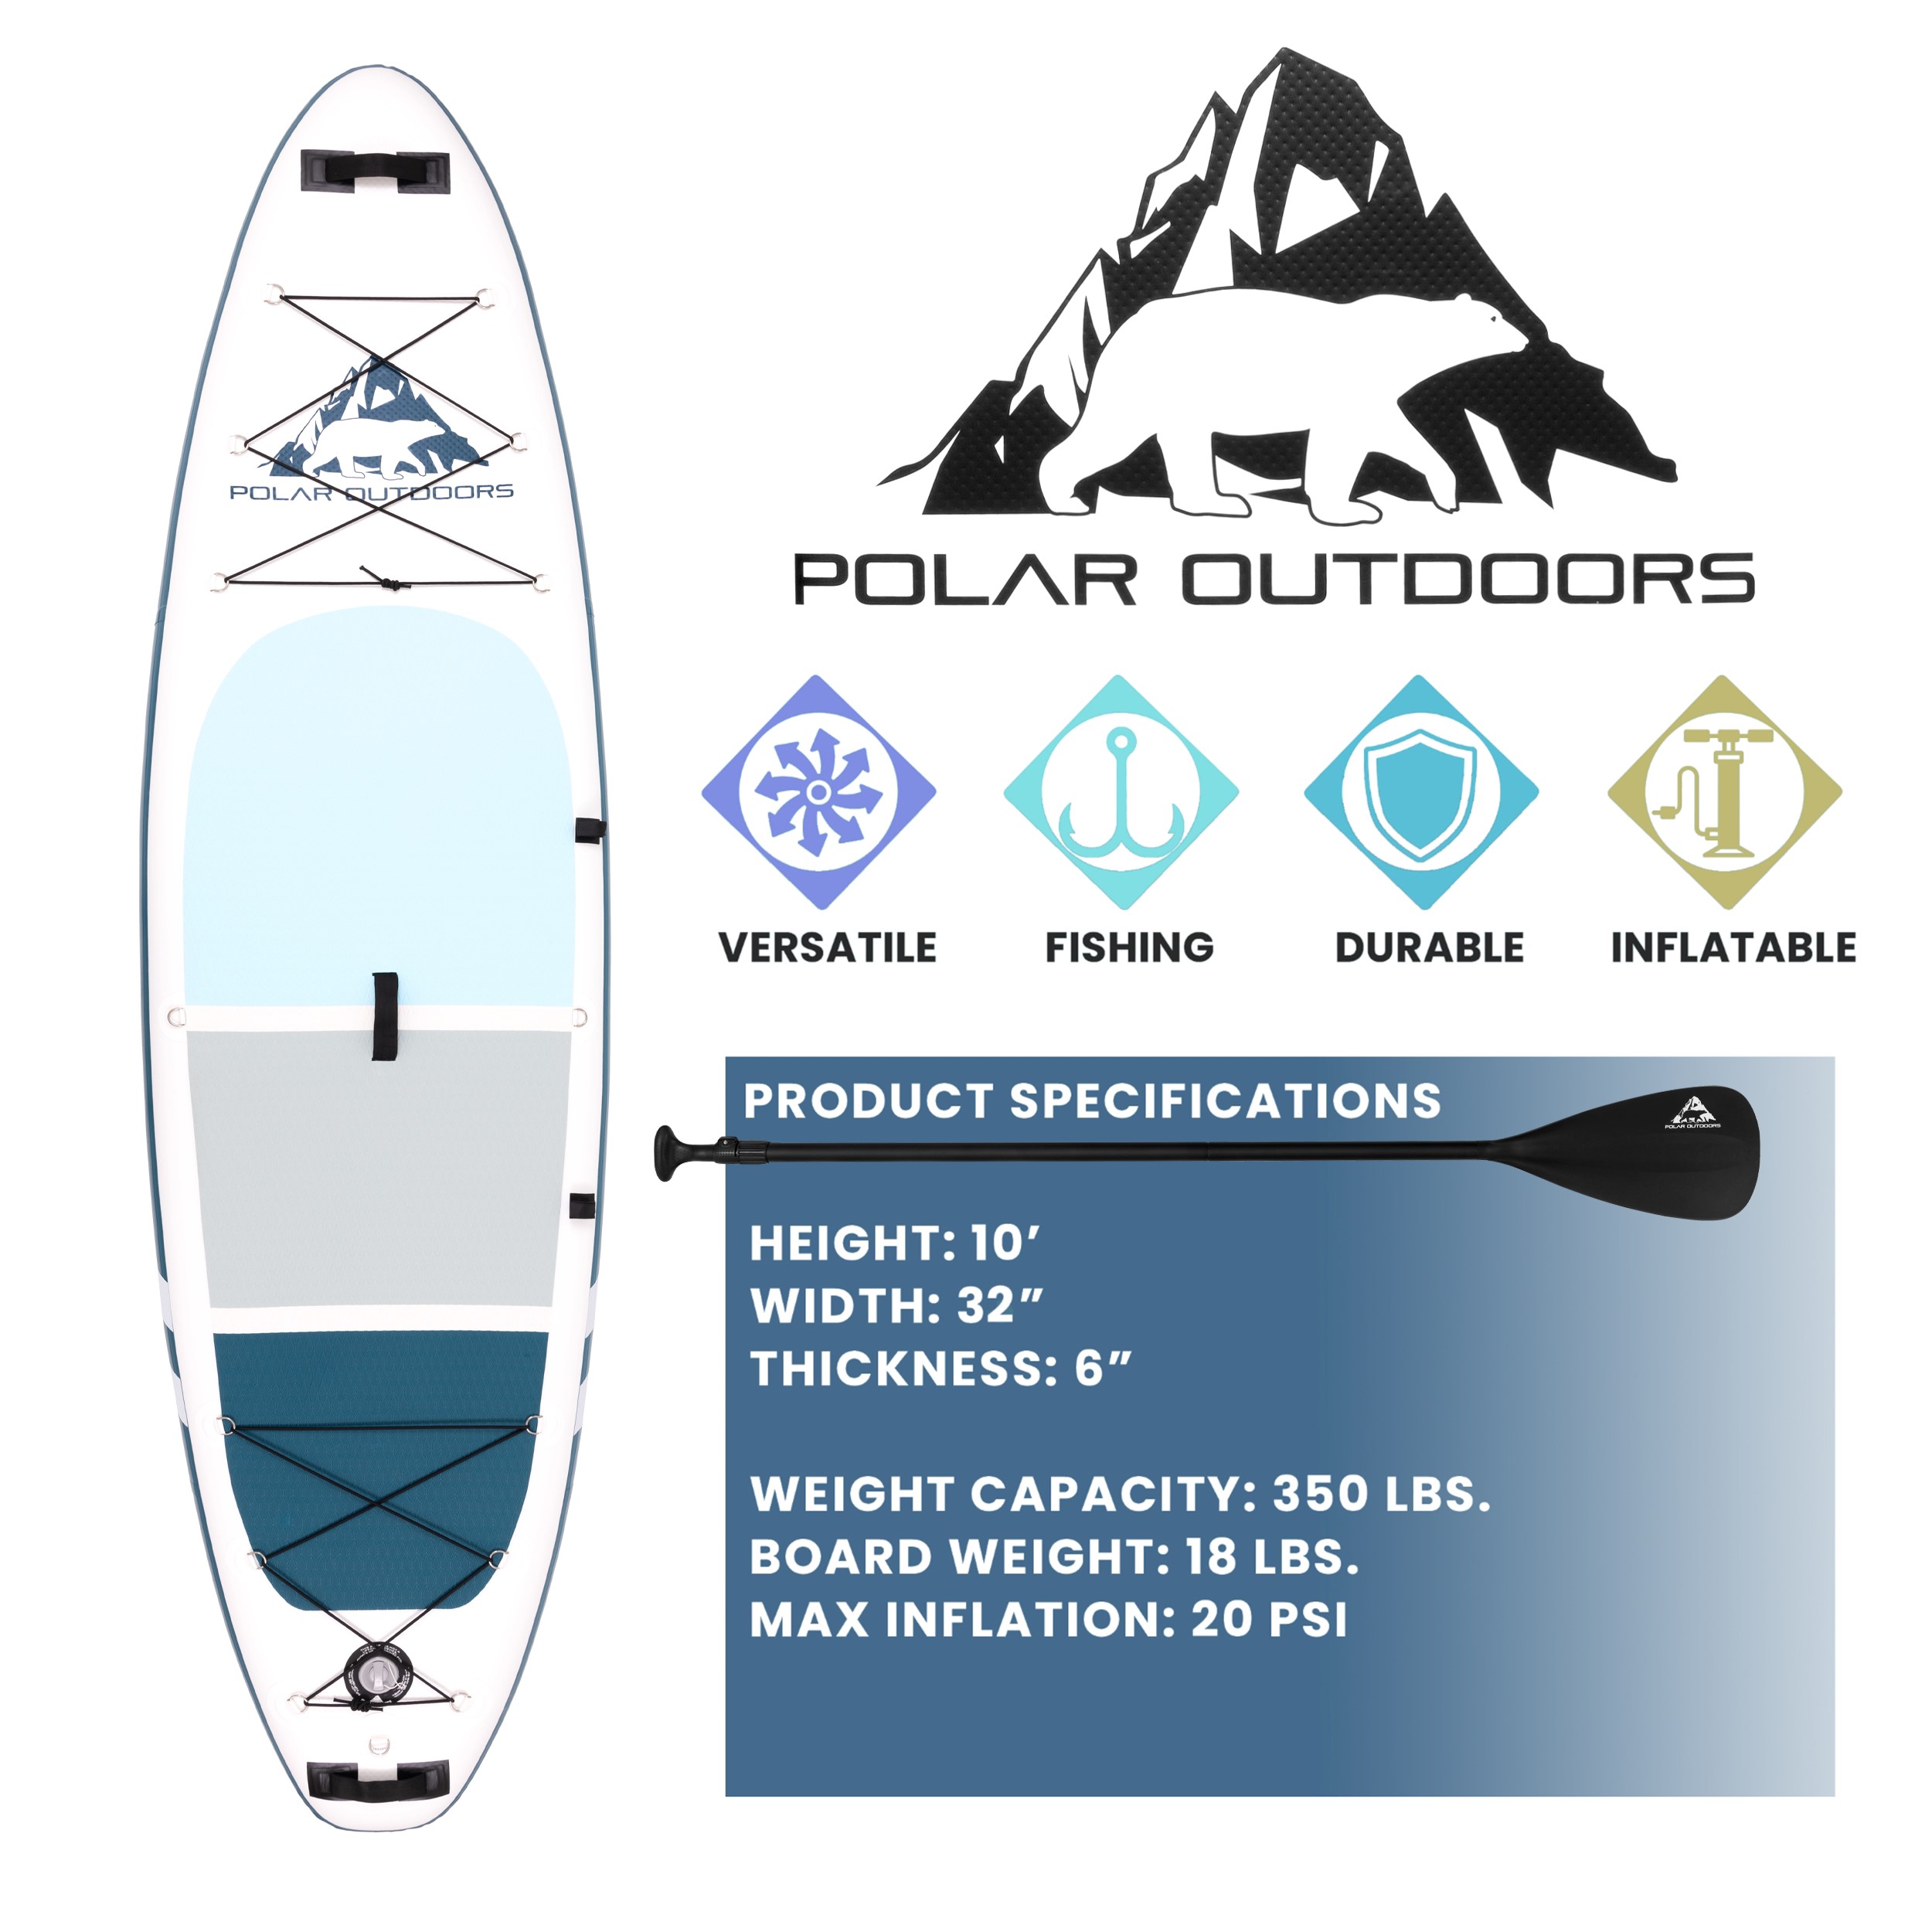 Polar Outdoors by Roc Inflatable Stand Up Paddle Board with Premium sup Accessories & Backpack, Non-Slip Deck, Waterproof Bag, Leash, Paddle and Hand Pump - image 2 of 3